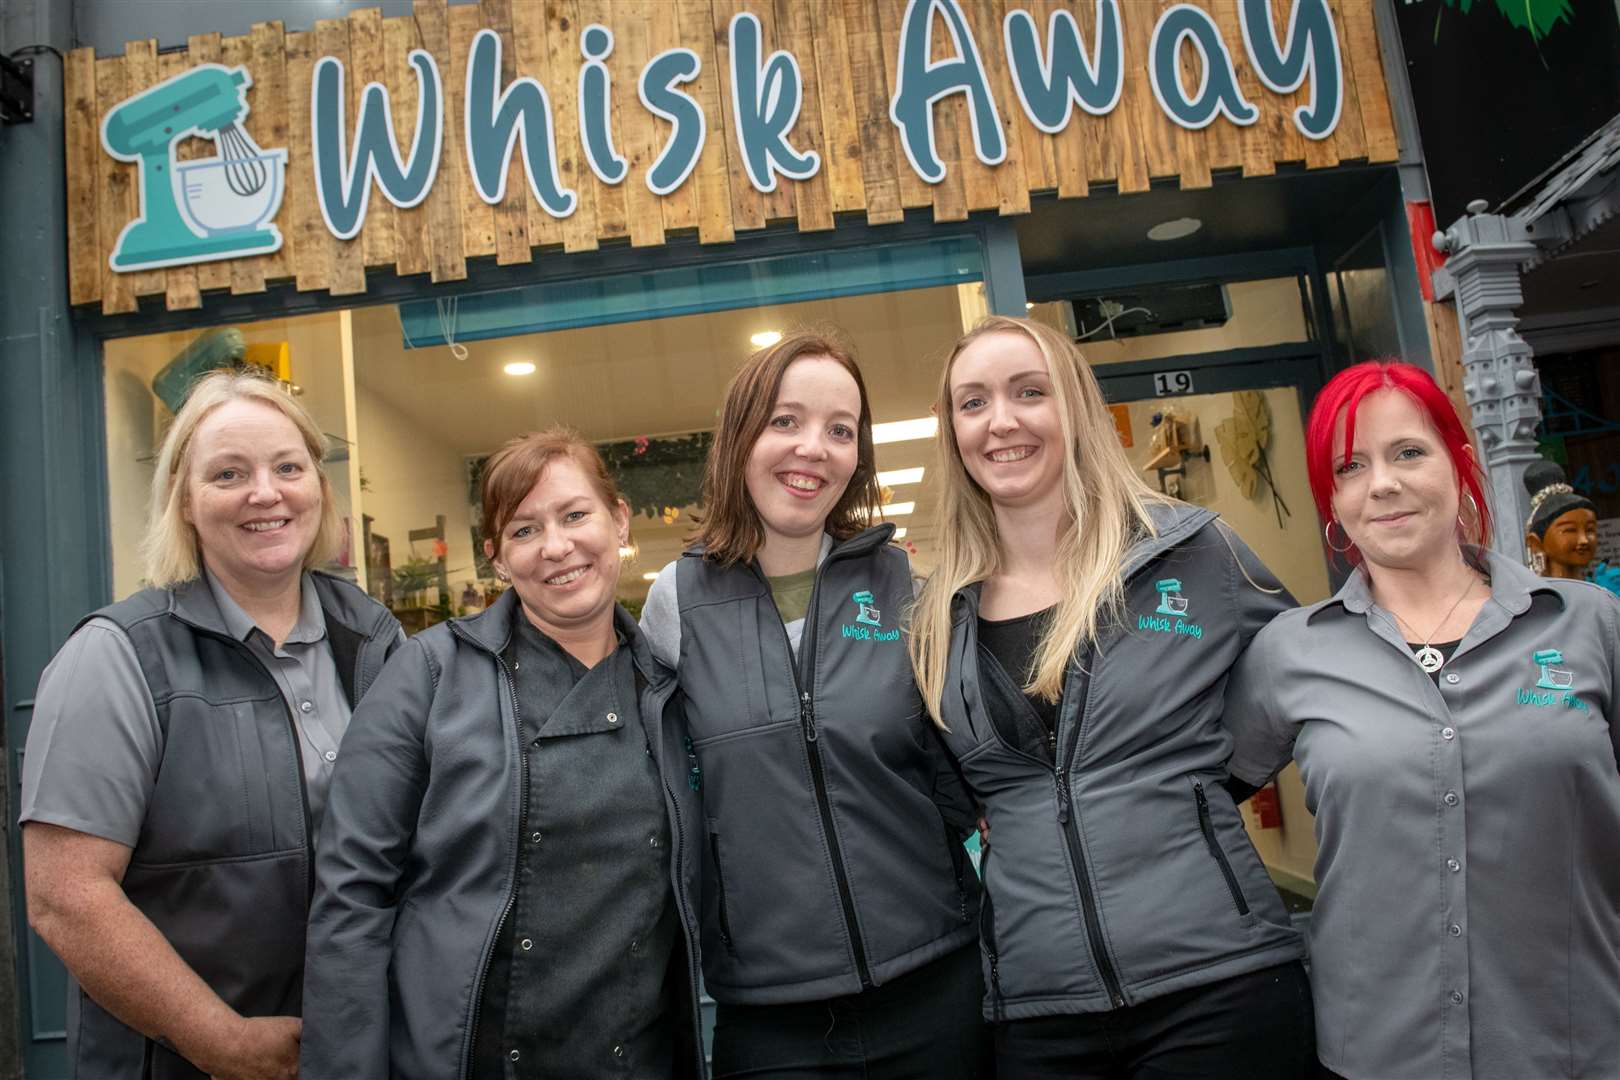 Celebrating the reopening of Whisk Away at its new location in Queensgate are Janice Dixon, Iwona Leonie, Nyomi Dixon, Ivana Sumnar and Abby Macdonald. Picture: Callum Mackay.